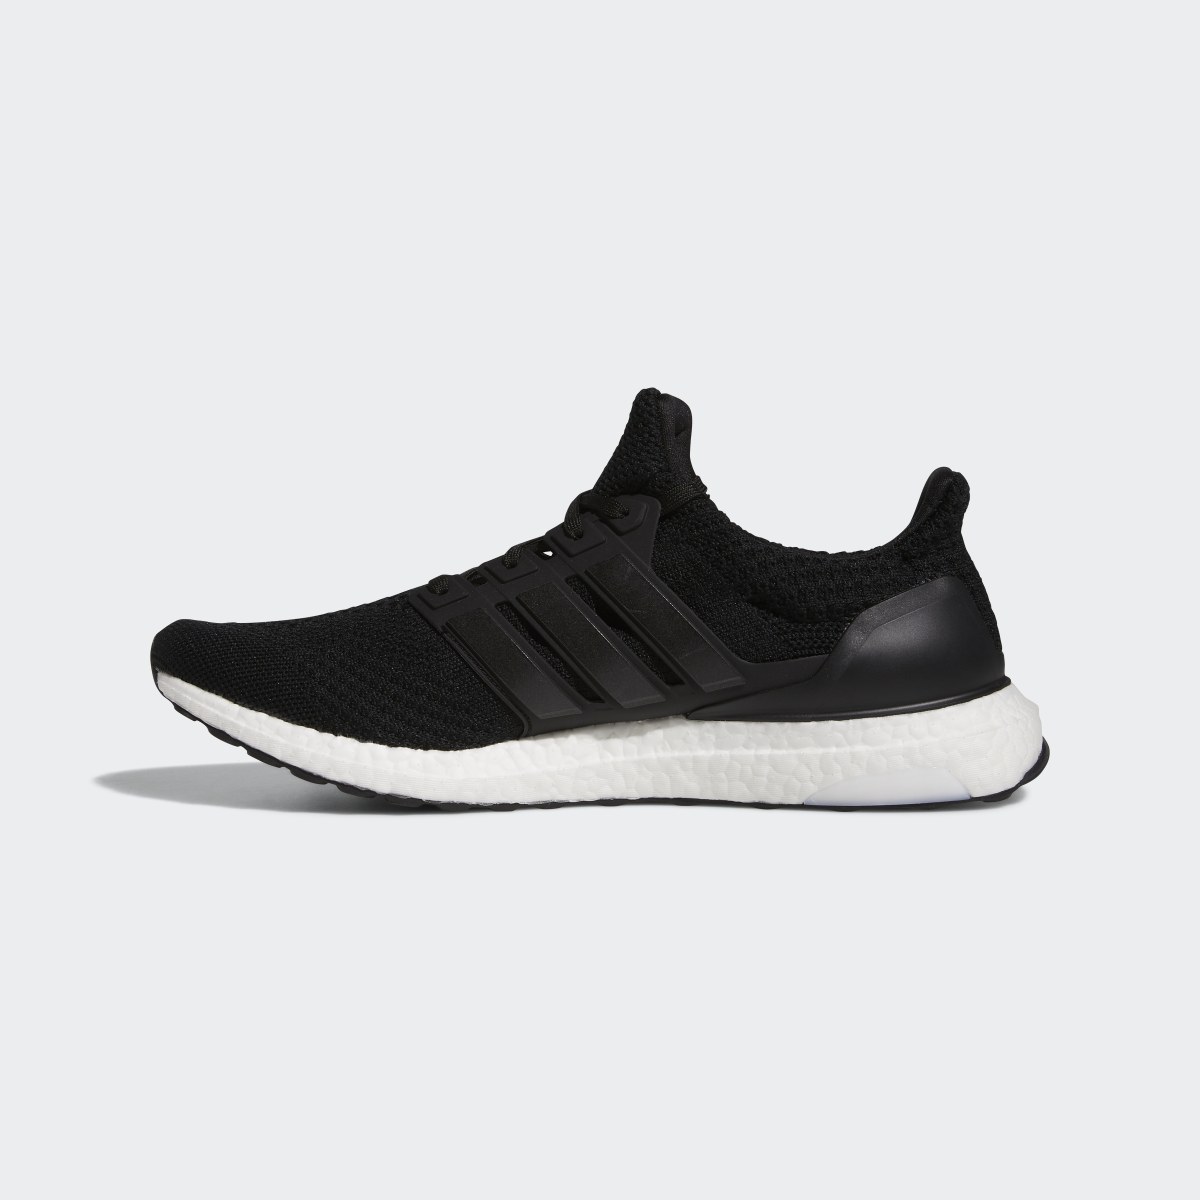 Adidas Ultraboost 5 DNA Running Lifestyle Shoes. 10